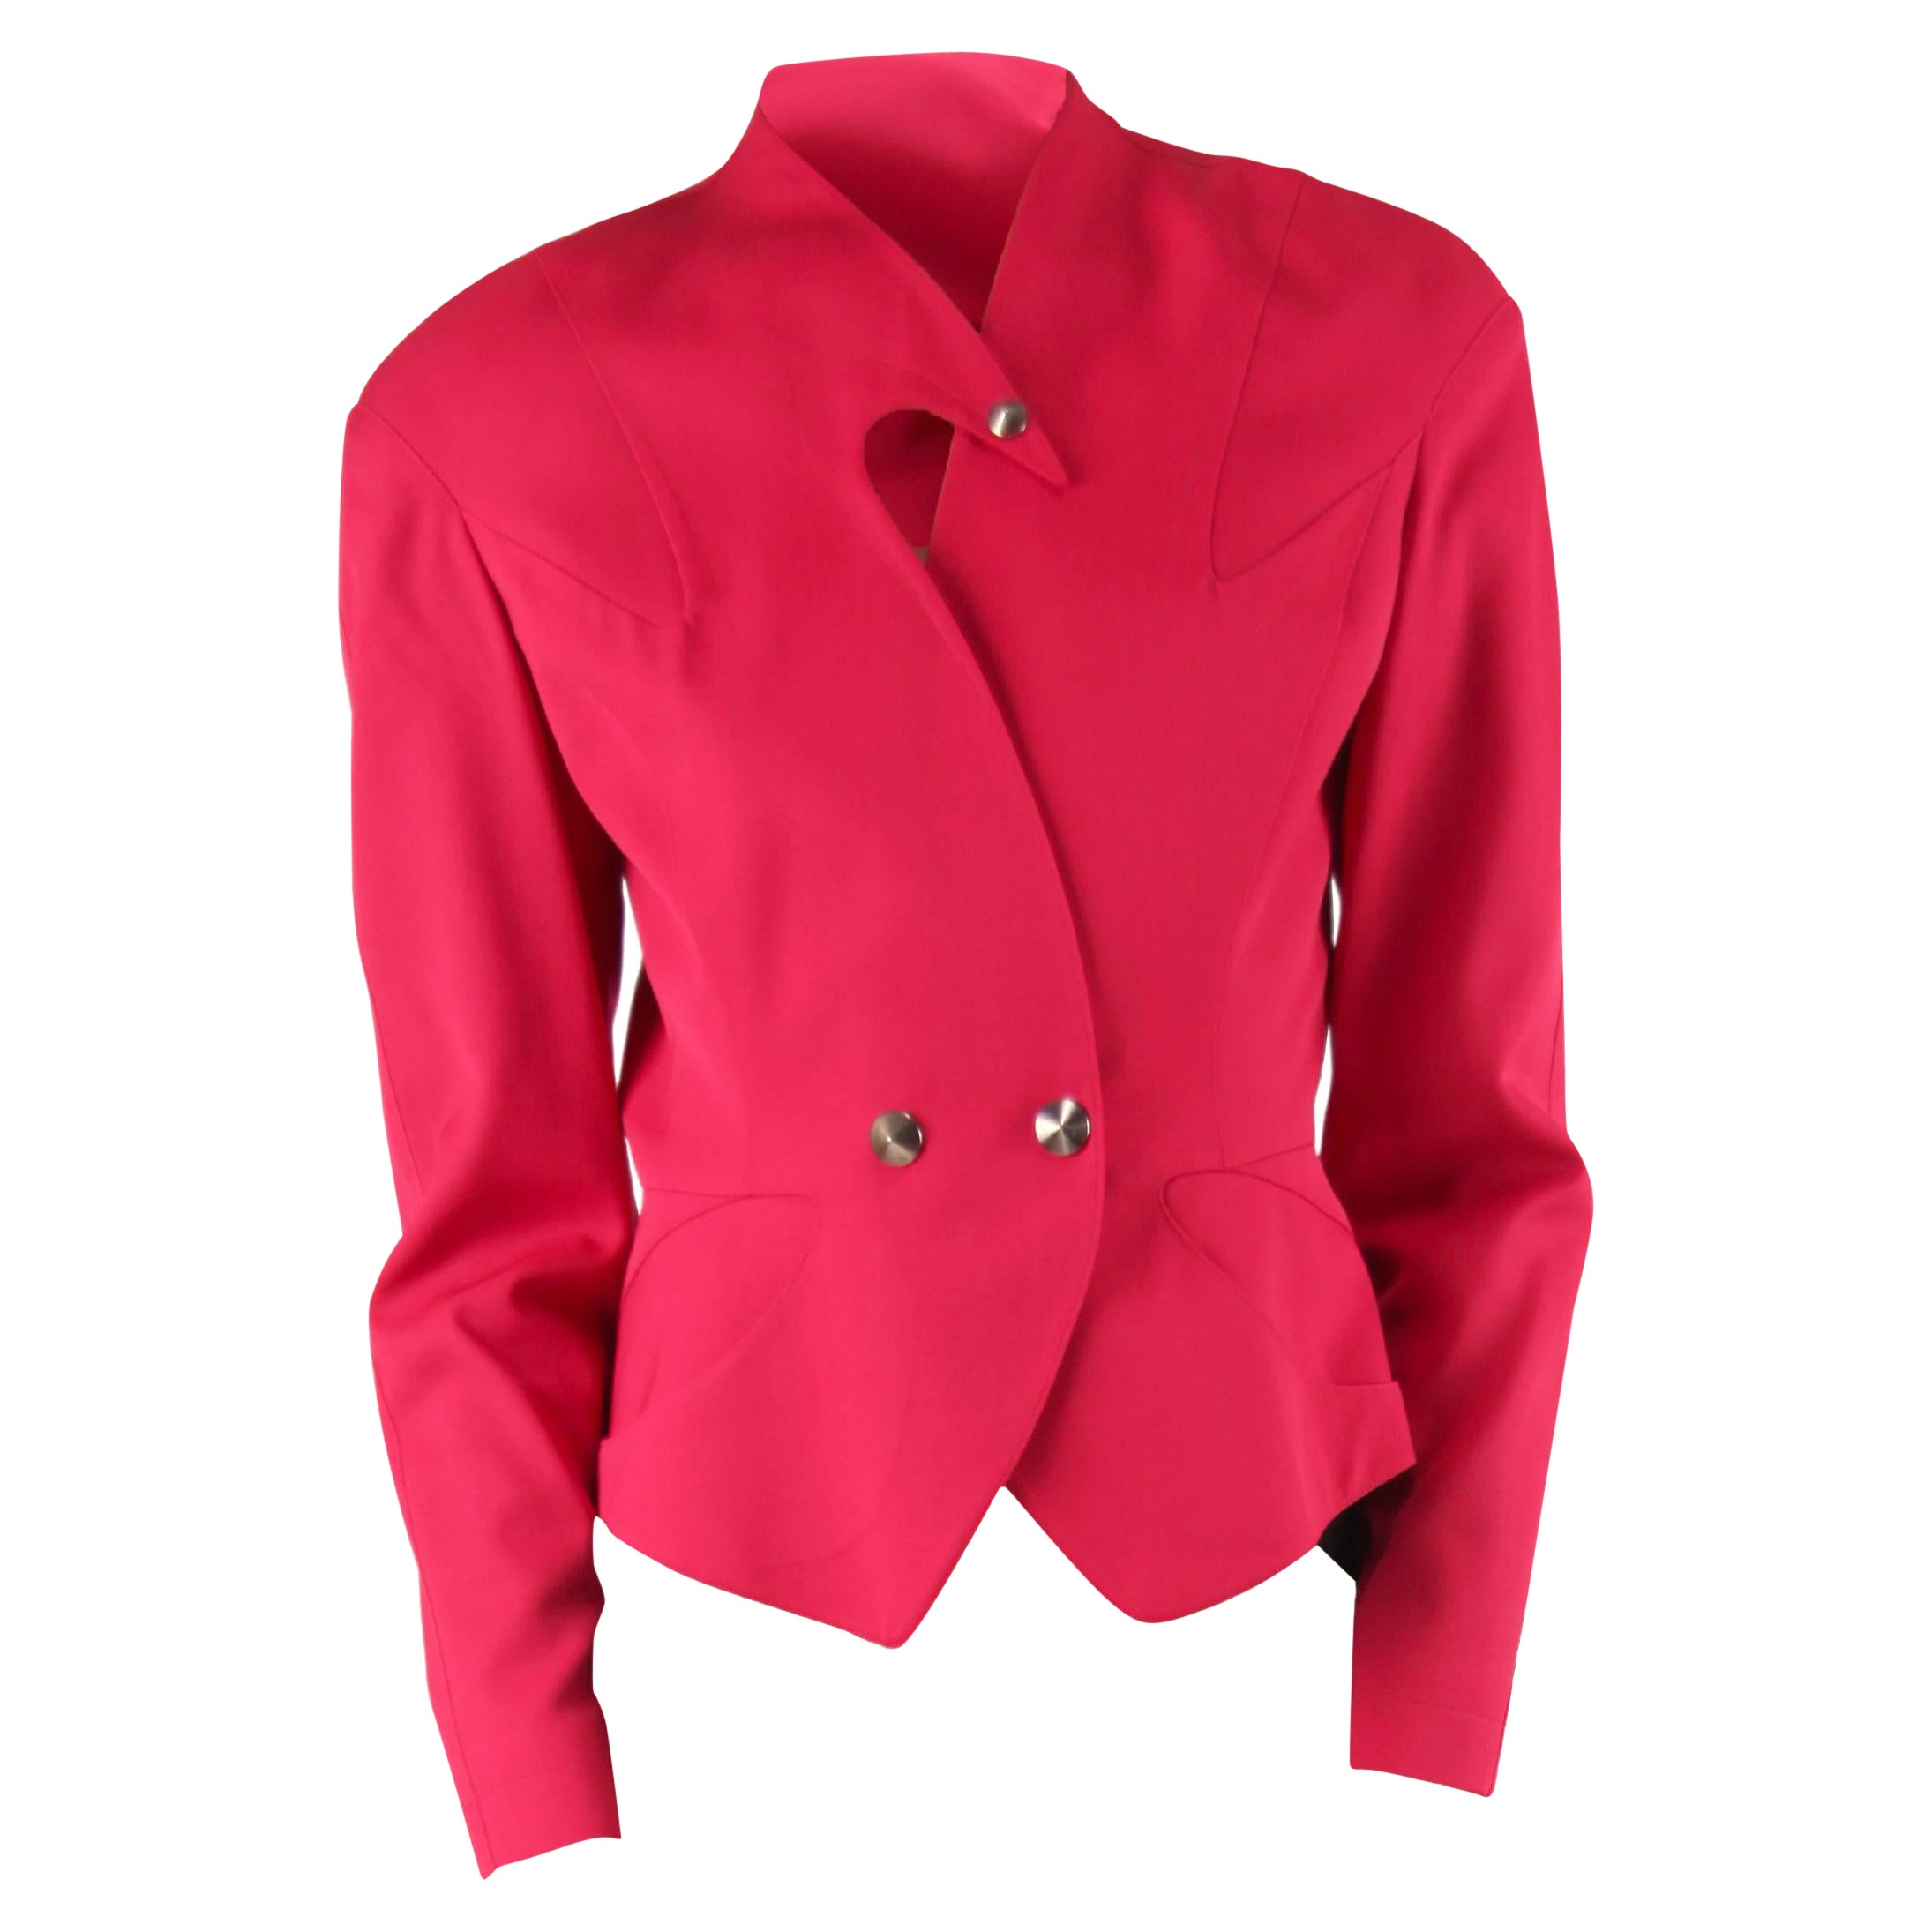 Thierry Mugler collectable intense “red-pink” hourglass jacket, circa 1980s For Sale